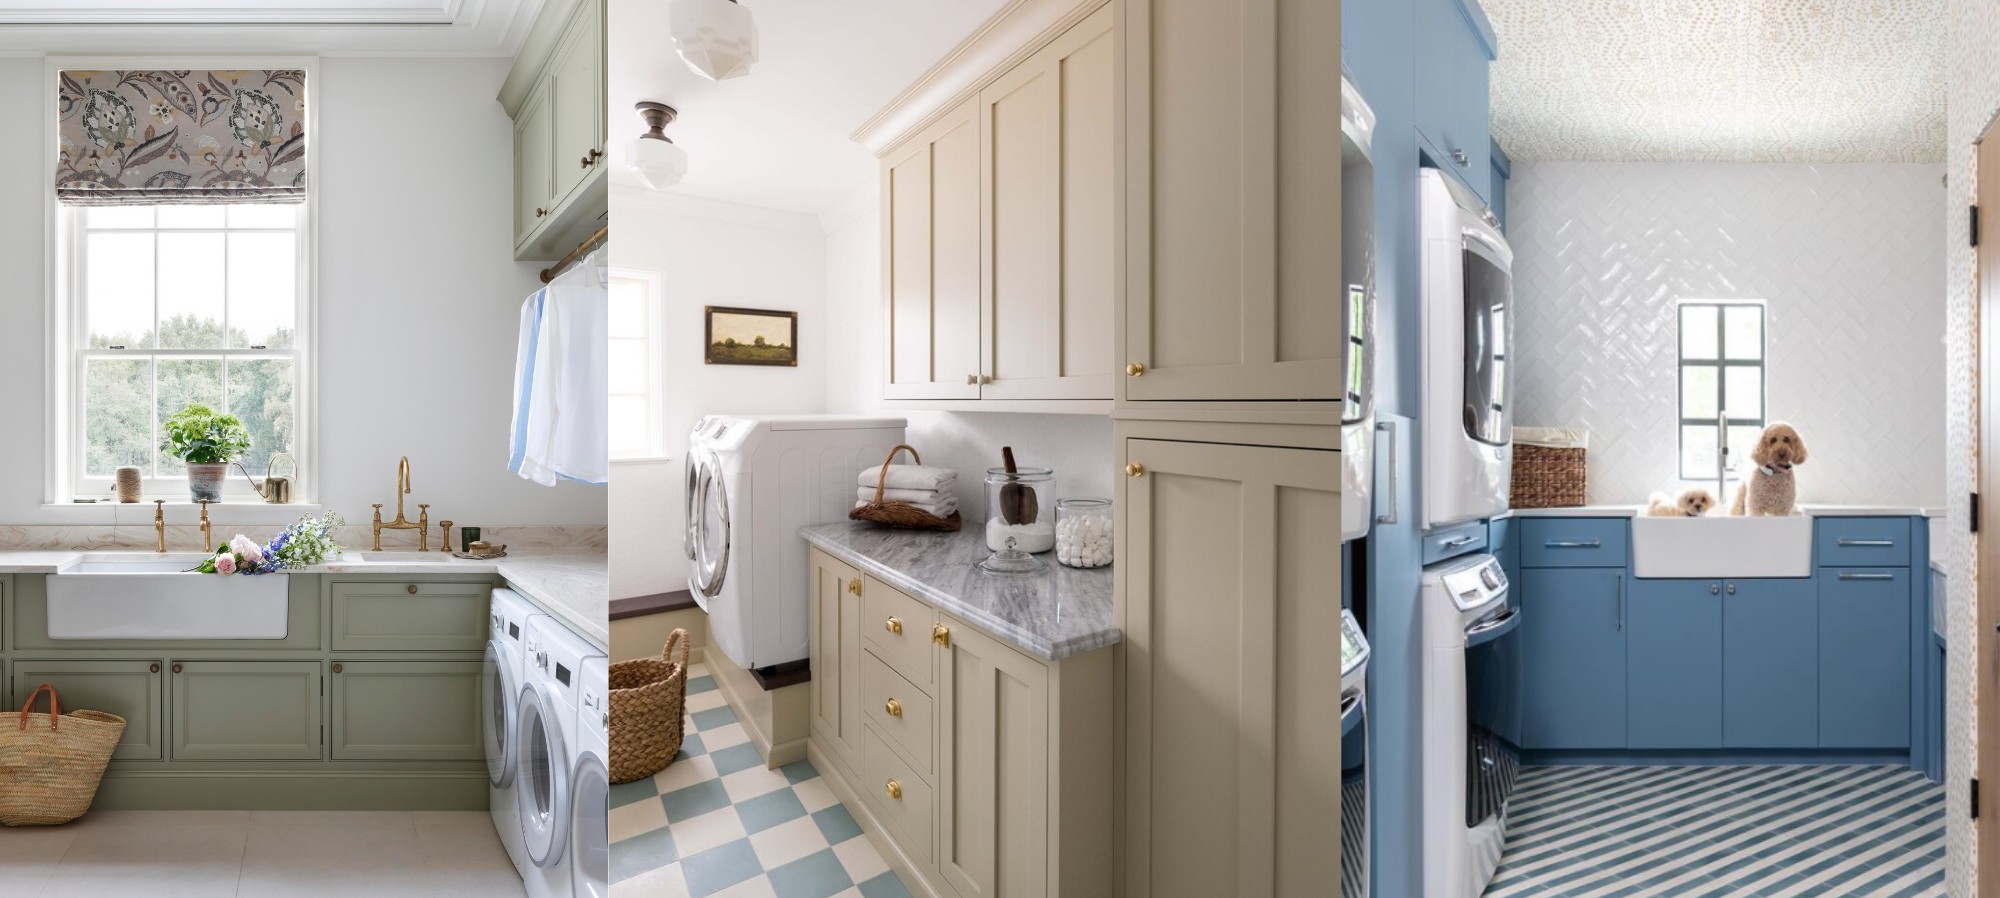 Laundry Room Ideas: 23 Luxurious Looks For Your Laundry Room |